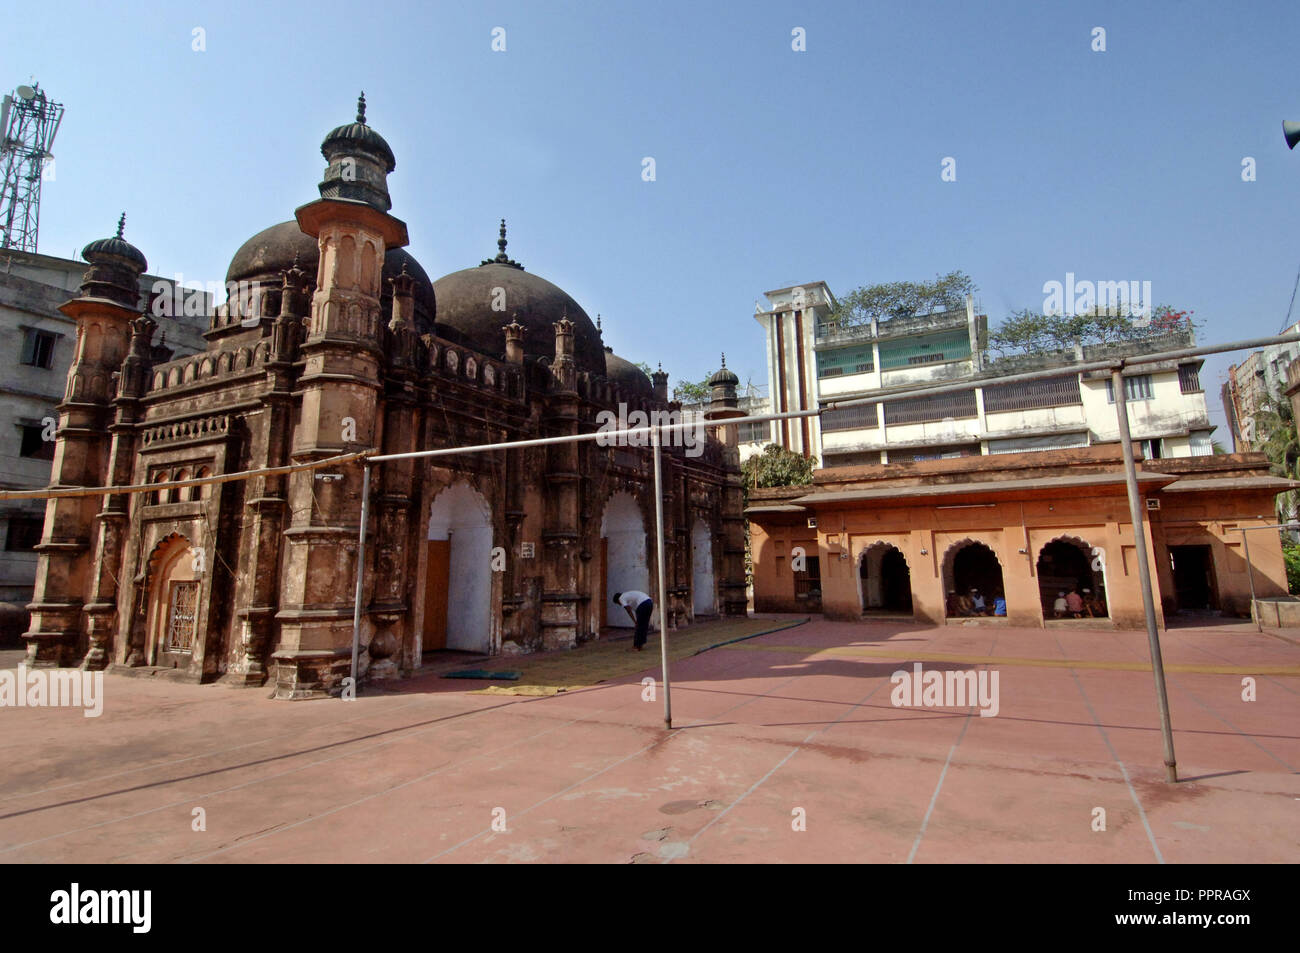 Dhaka, Bangladesh - February 23, 2009: The Khan Mohammad Mirza Mosque on Lalbagh road is situated less than half a kilometre west of the Lalbagh Fort. Stock Photo